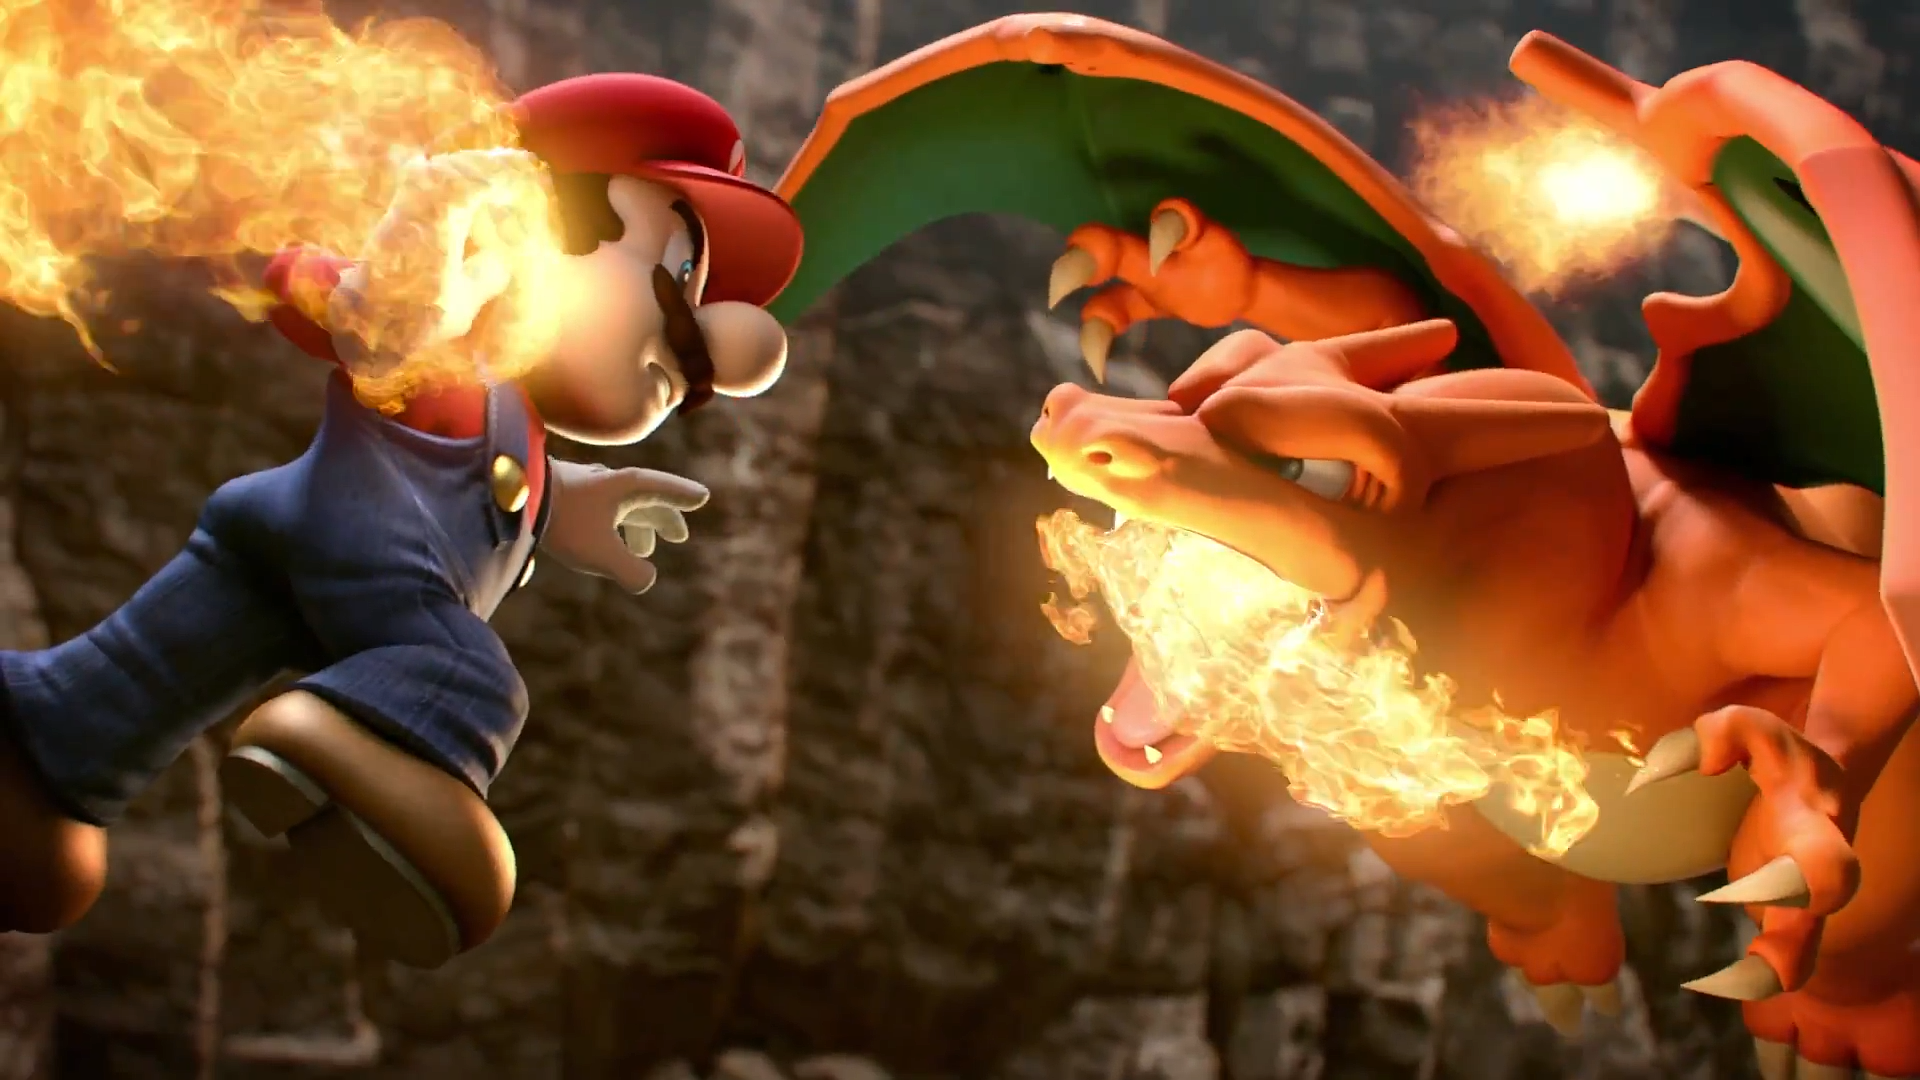 Video Game Super Smash Bros For Nintendo 3DS And Wii U 1920x1080